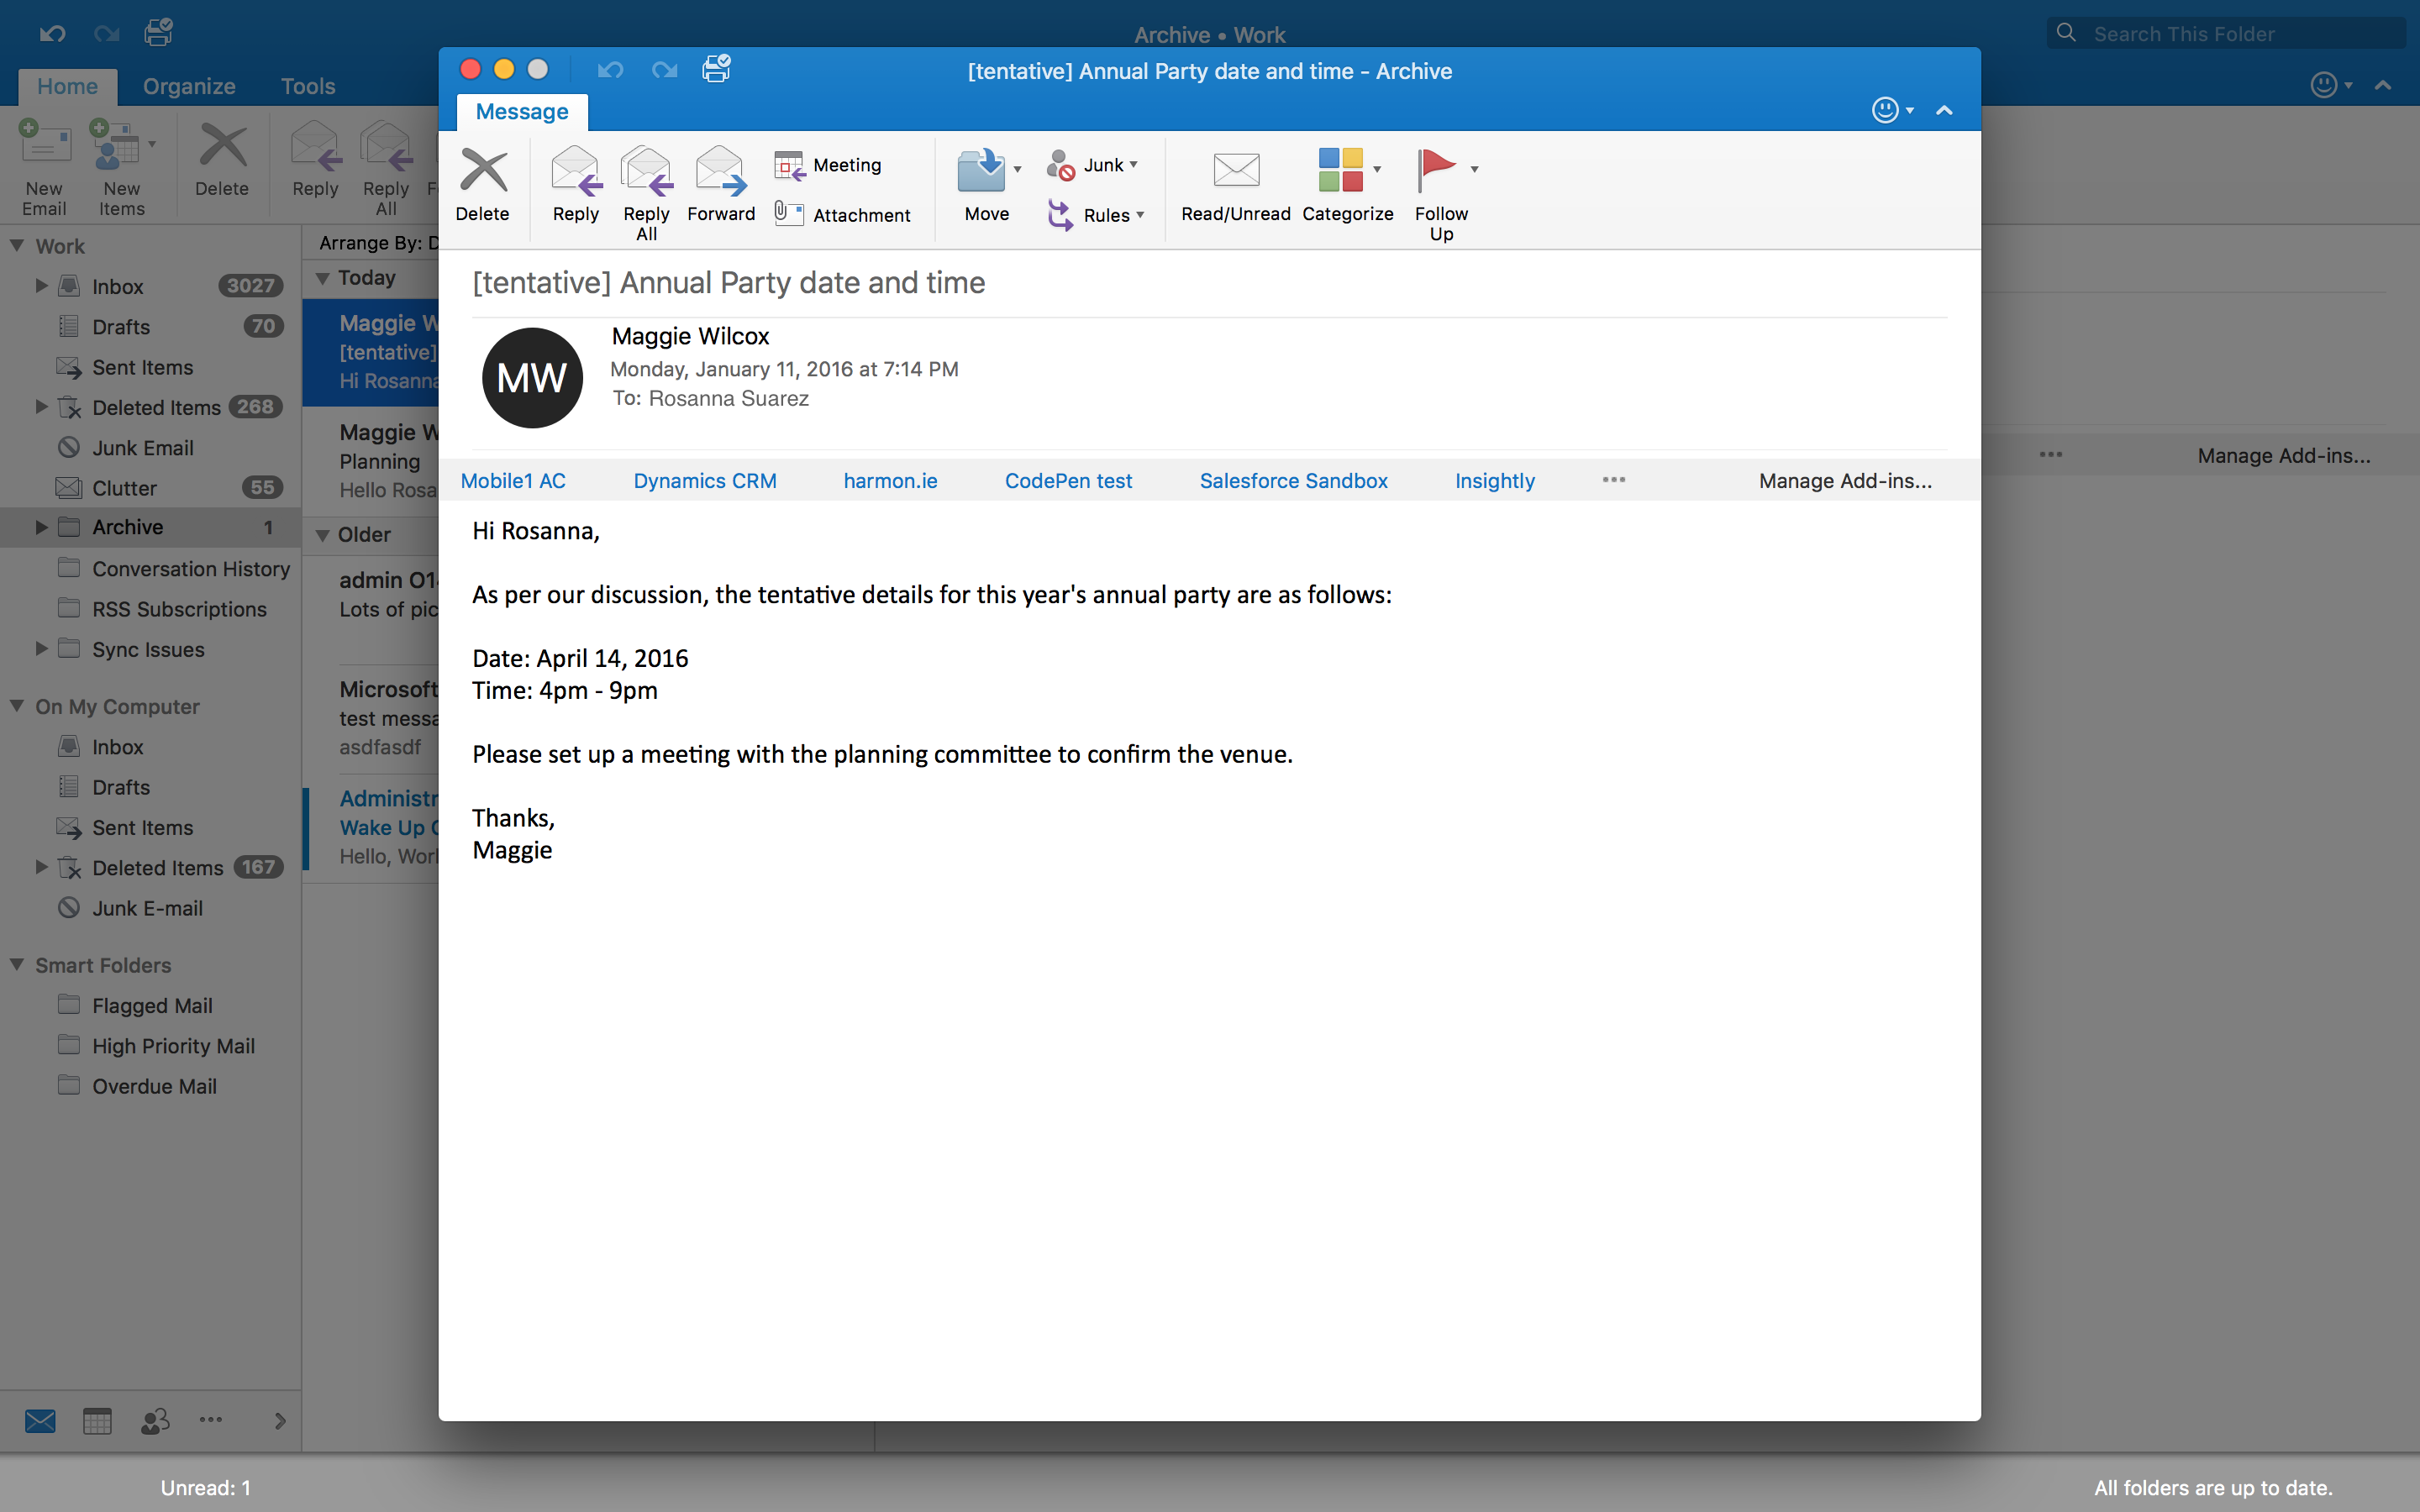 outlook for mac features for organizing email